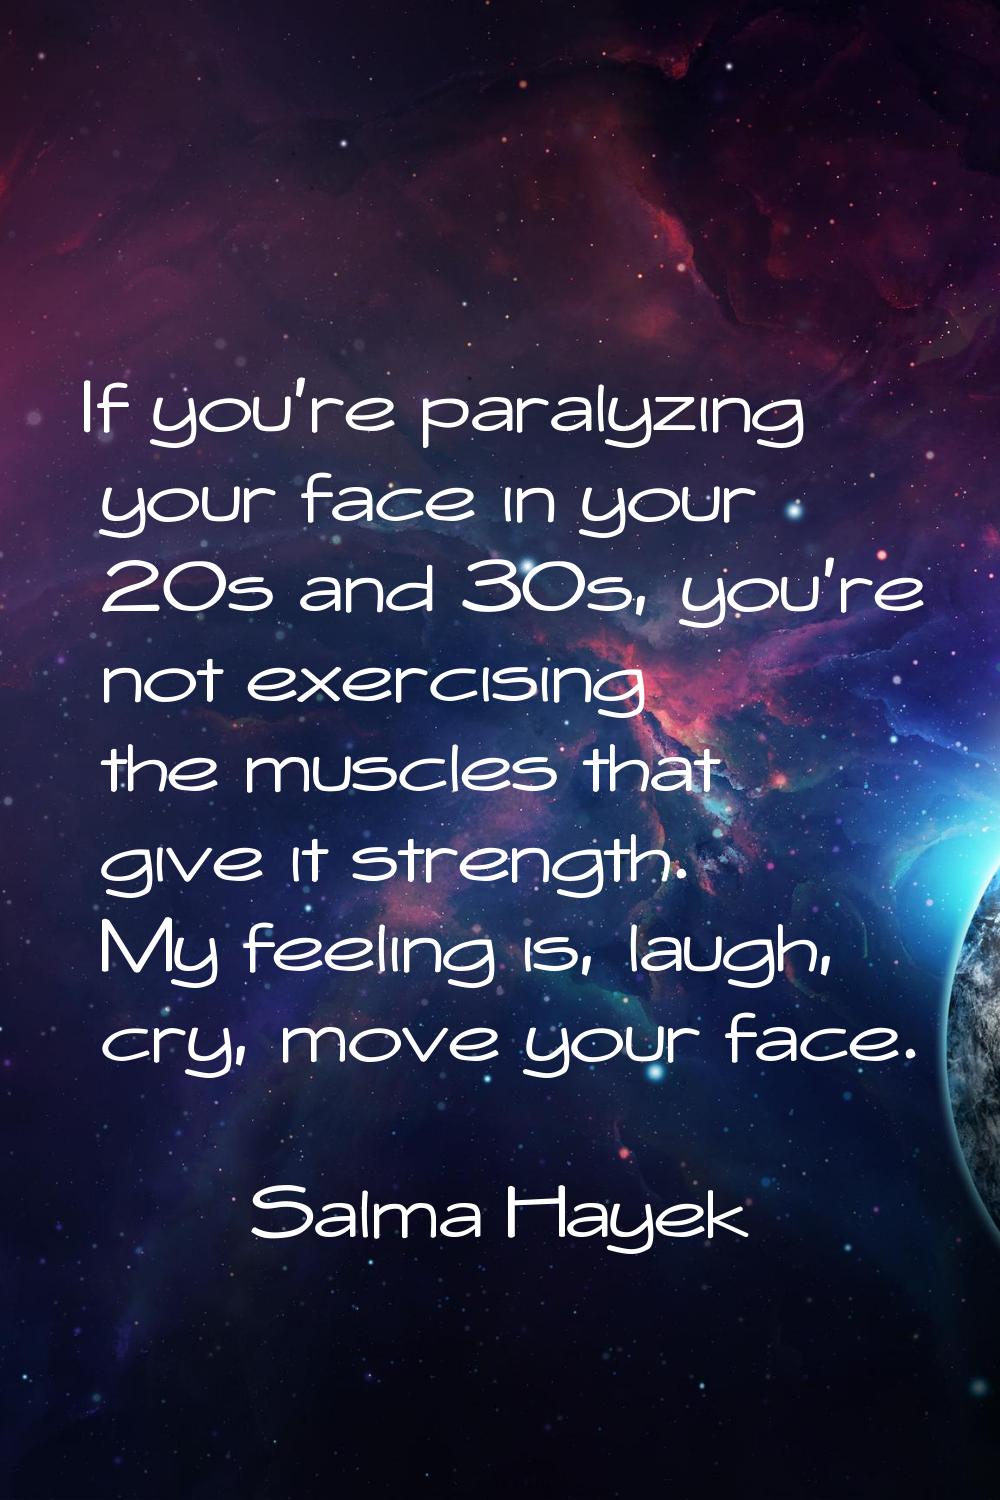 If you're paralyzing your face in your 20s and 30s, you're not exercising the muscles that give it 